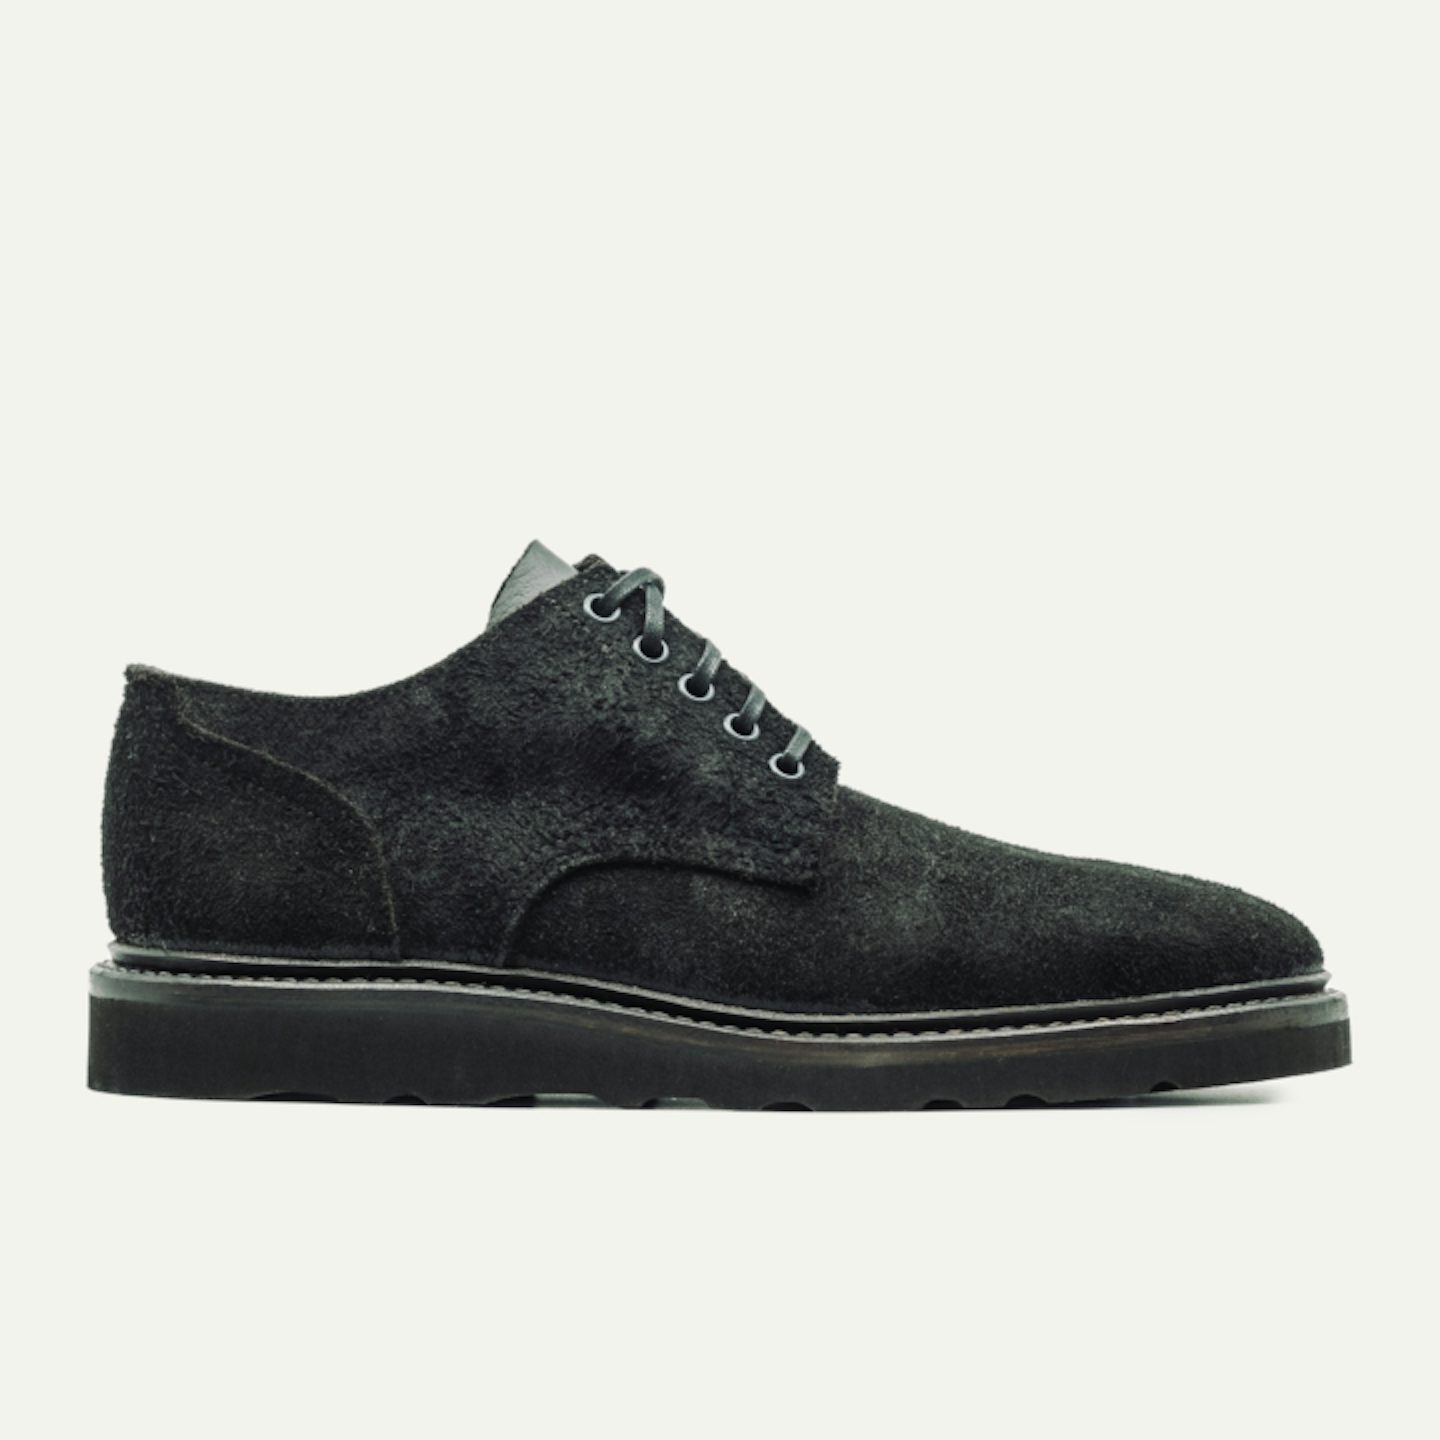 Trench Oxford - Black Oiled Congo Shrunken Bison Roughout